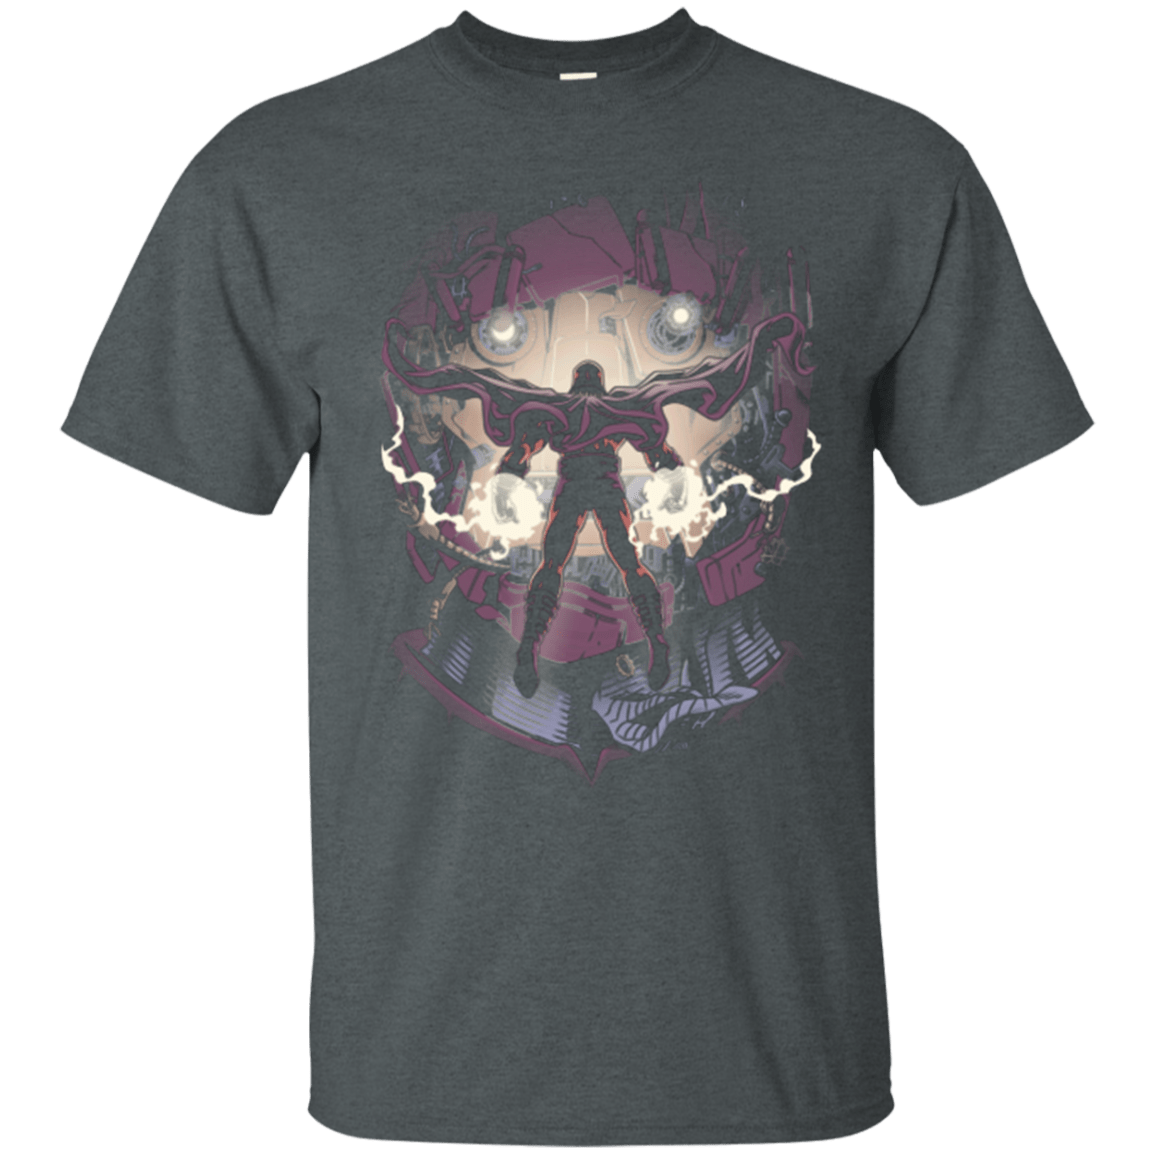 T-Shirts Dark Heather / Small Magnetic Confrontation T-Shirt